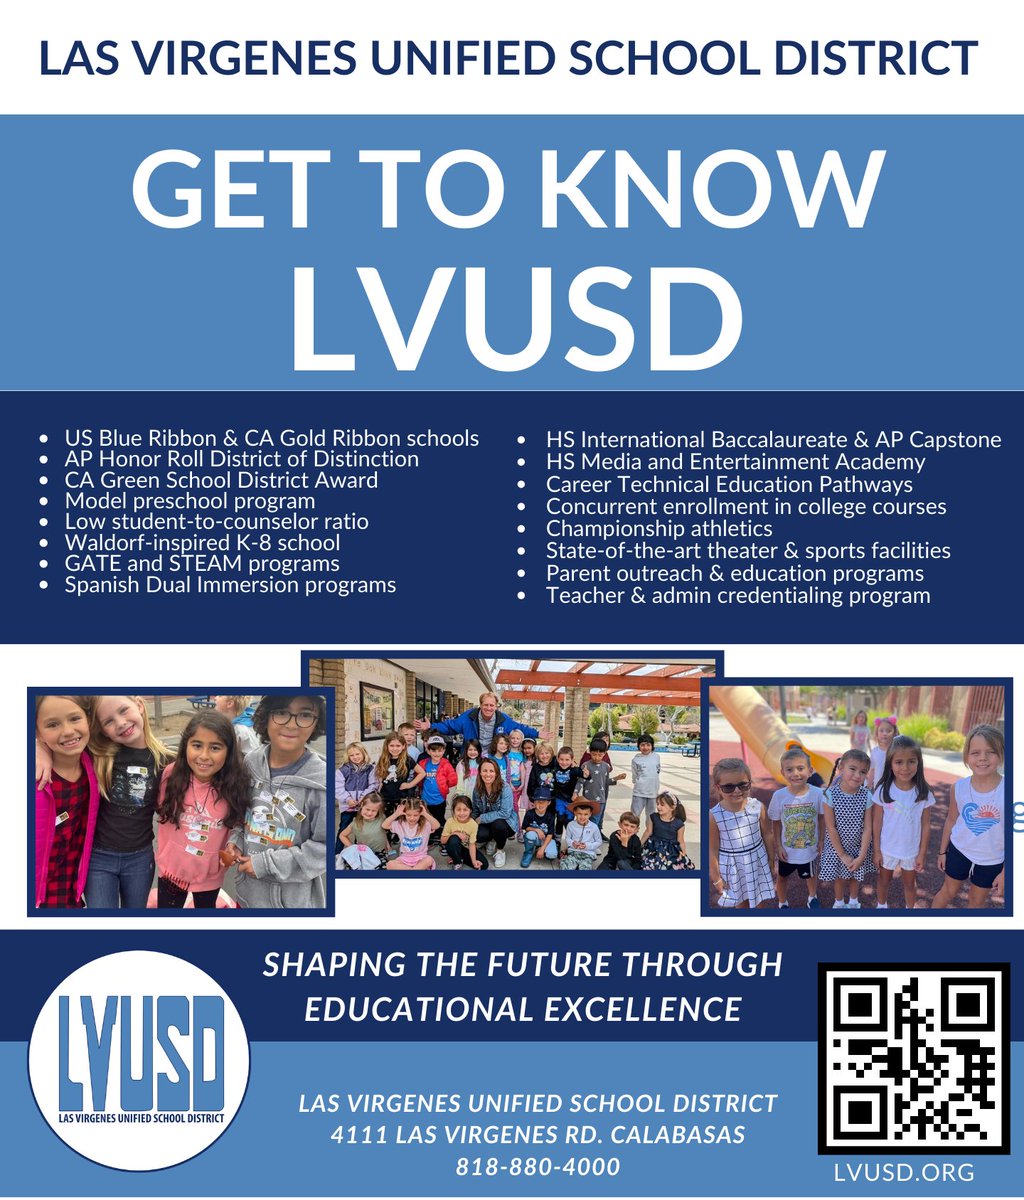 LVUSD will offer walk-in interviews Thursday, April 18th from 9-10 a.m. at the District Office for paraeducator positions. Bring your resume. We hope to see you there!